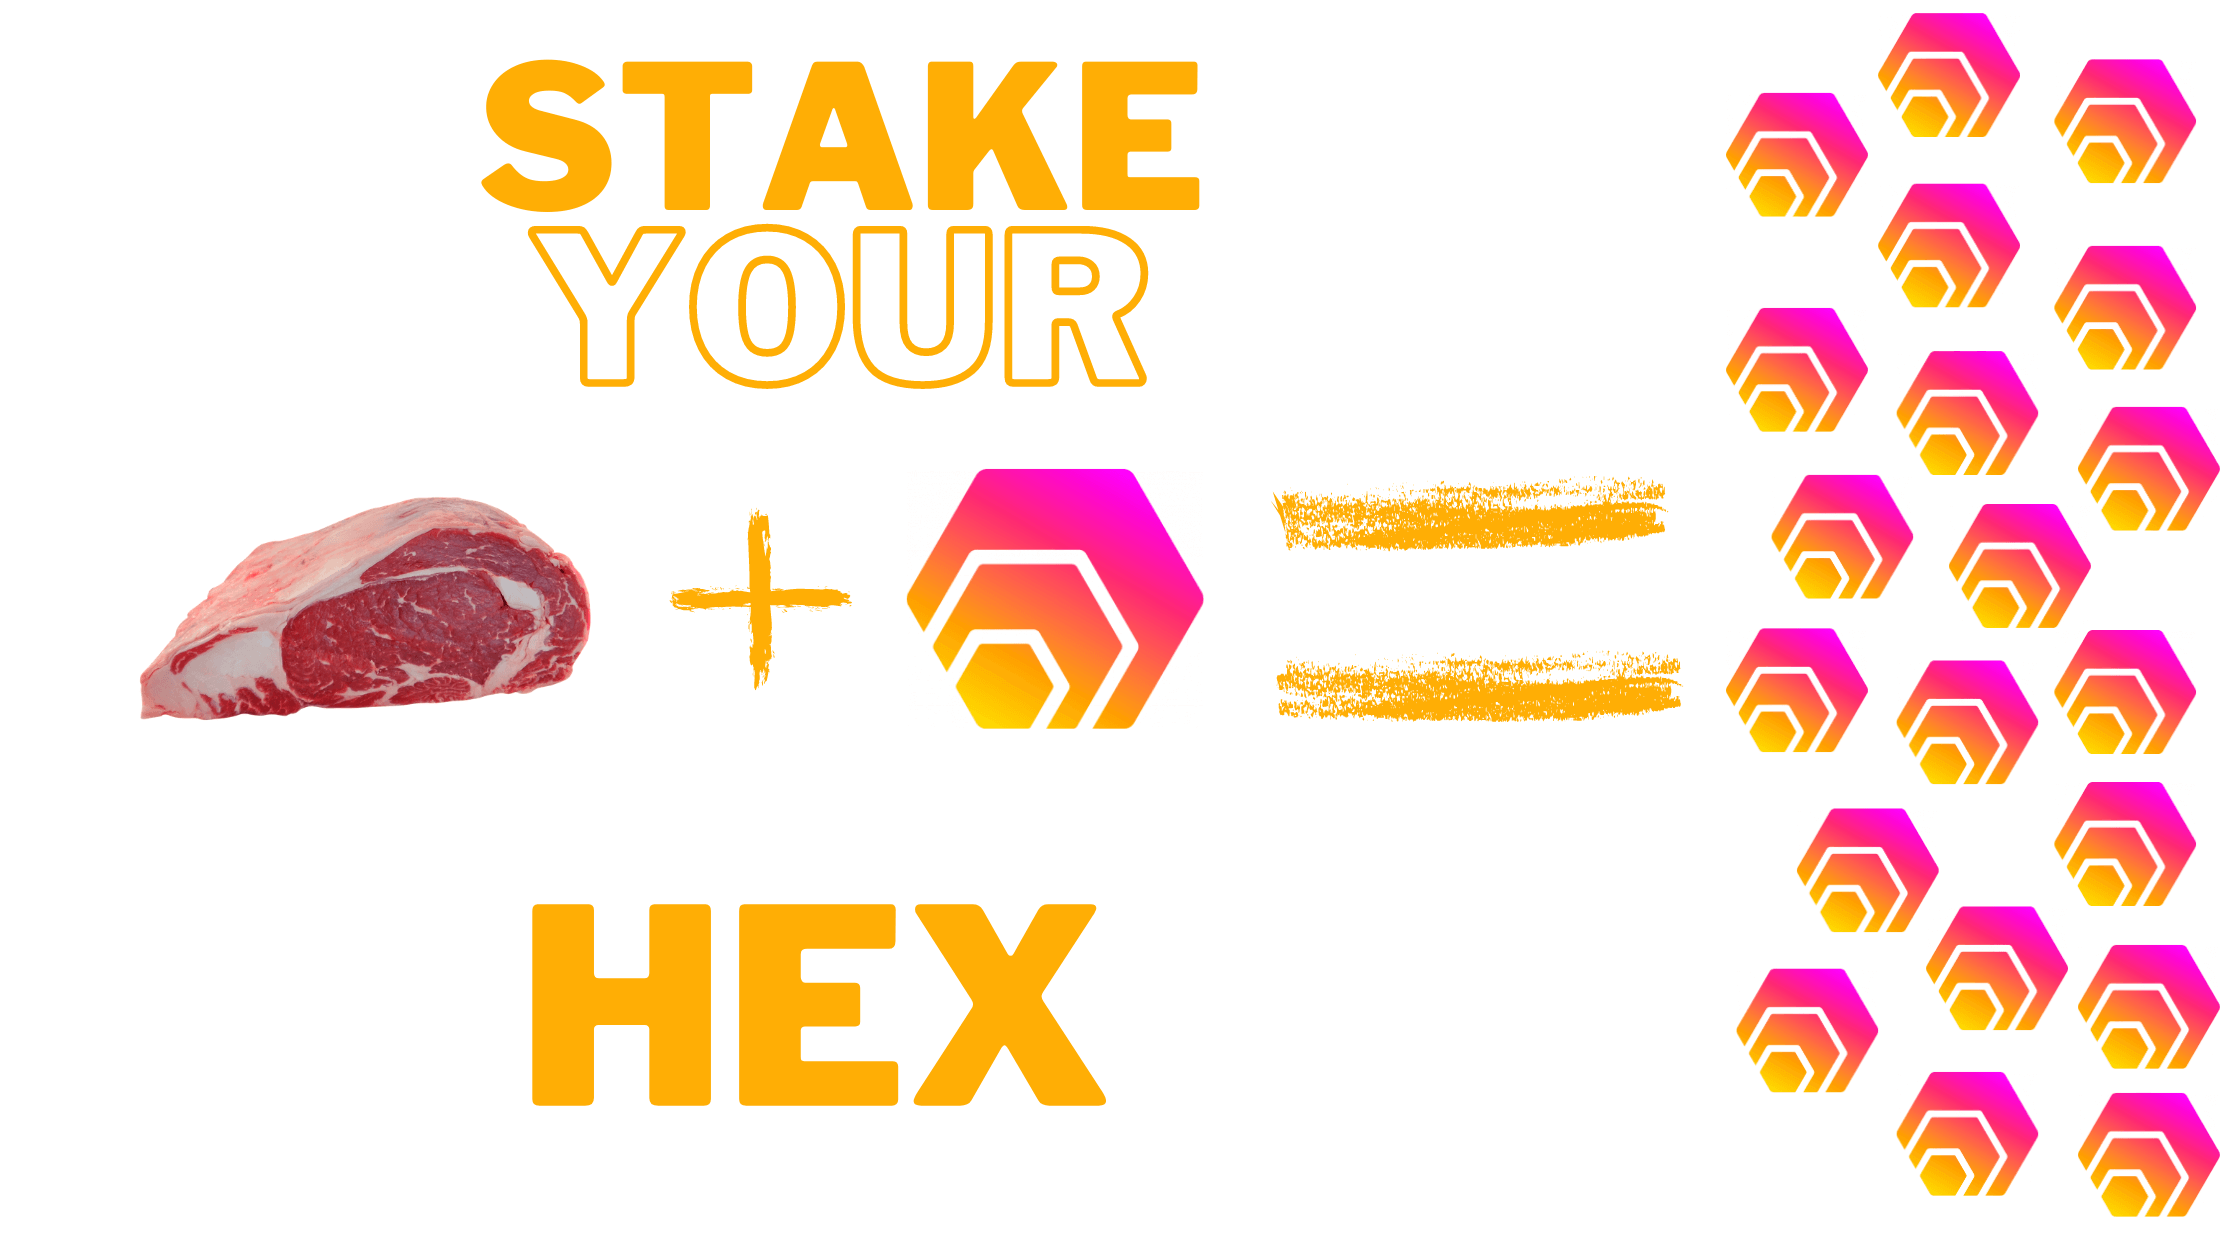 How to stake hex